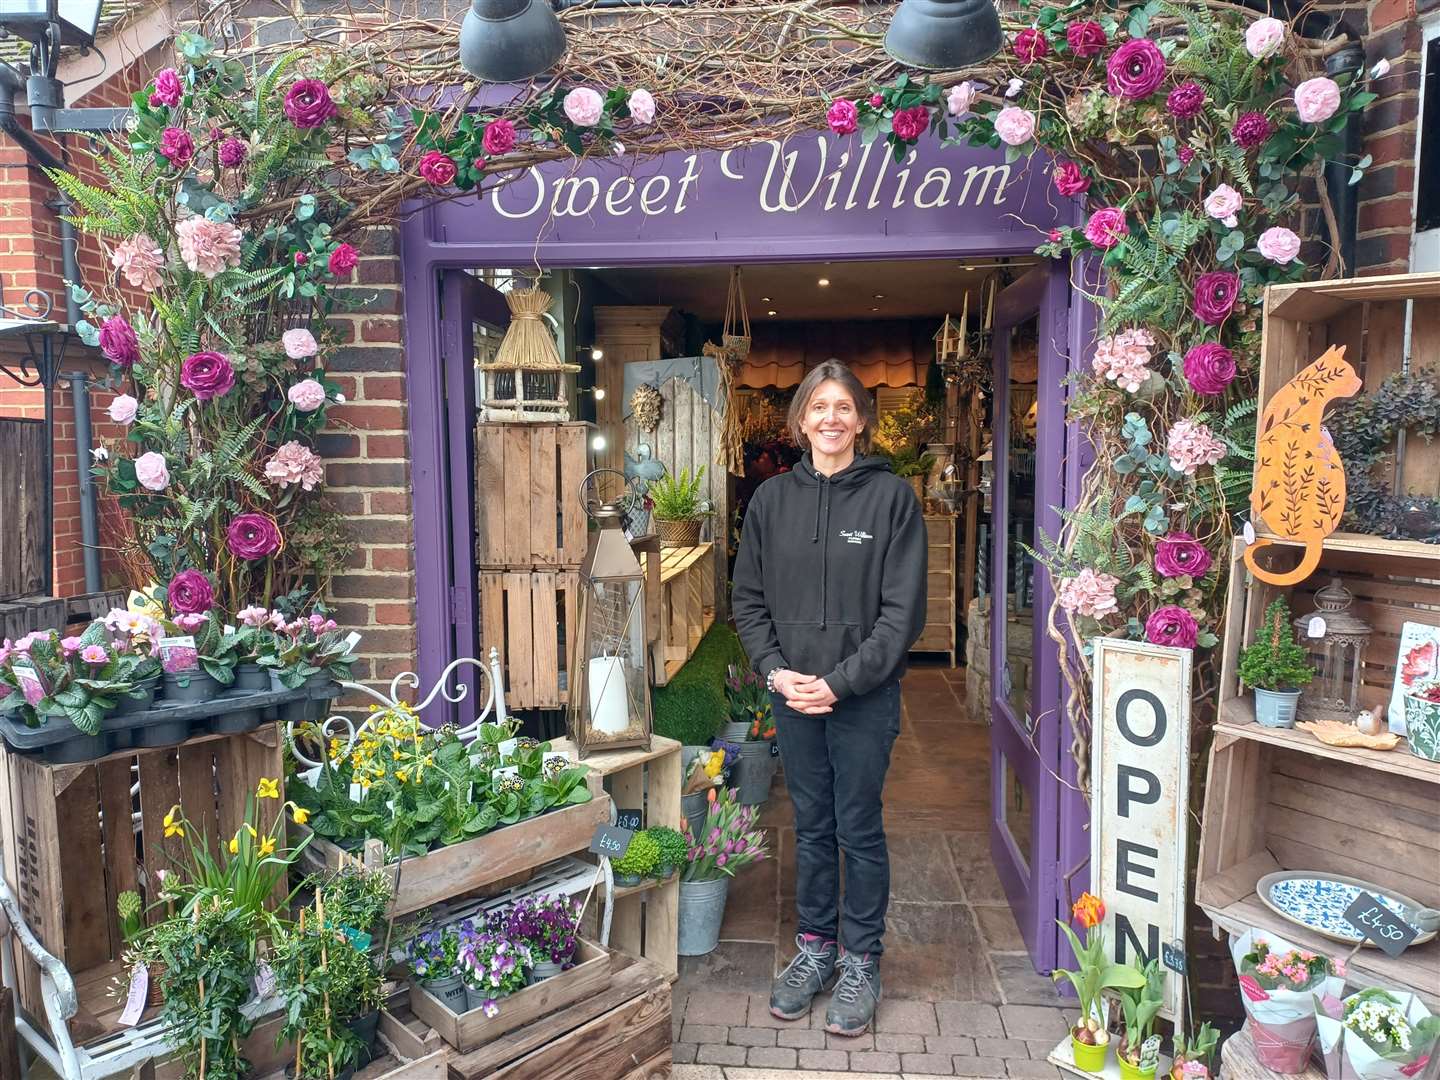 Julia Archer is the owner of Sweet William in Headcorn